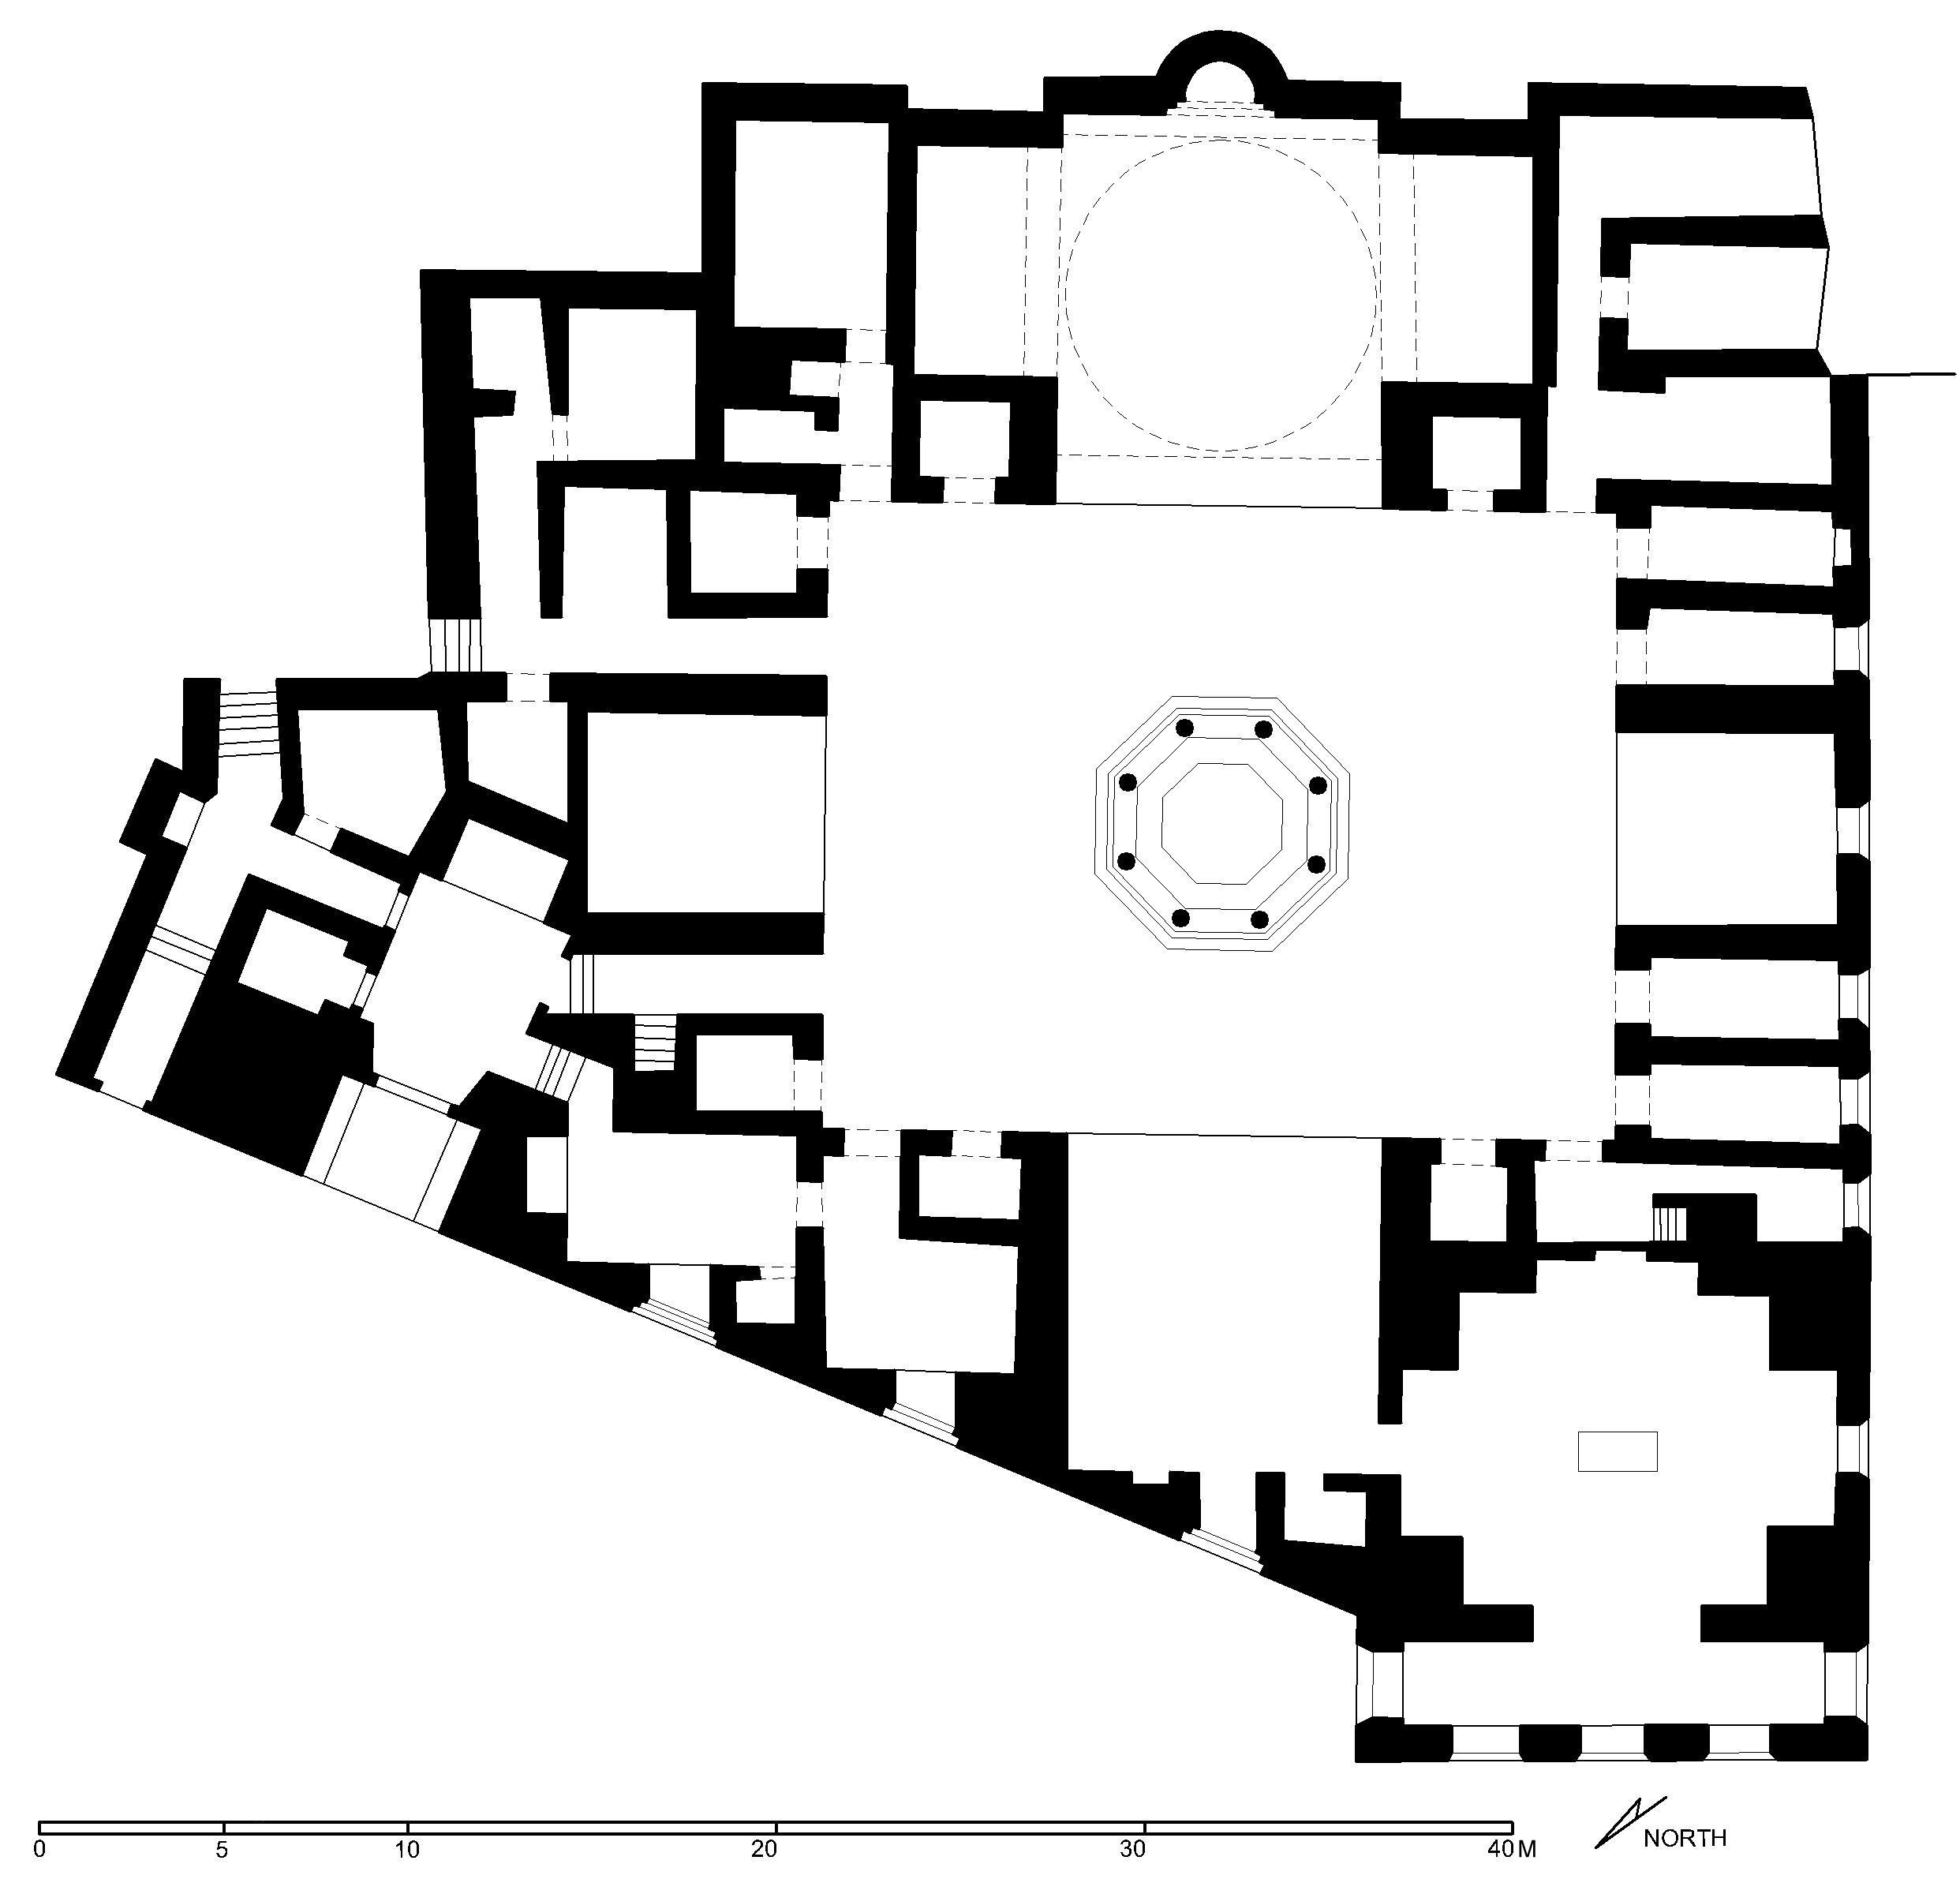 Madrasa Sarghatmish - Floor plan of funerary complex (after Meinecke) in AutoCAD 2000 format. Click the download button to download a zipped file containing the .dwg file. 